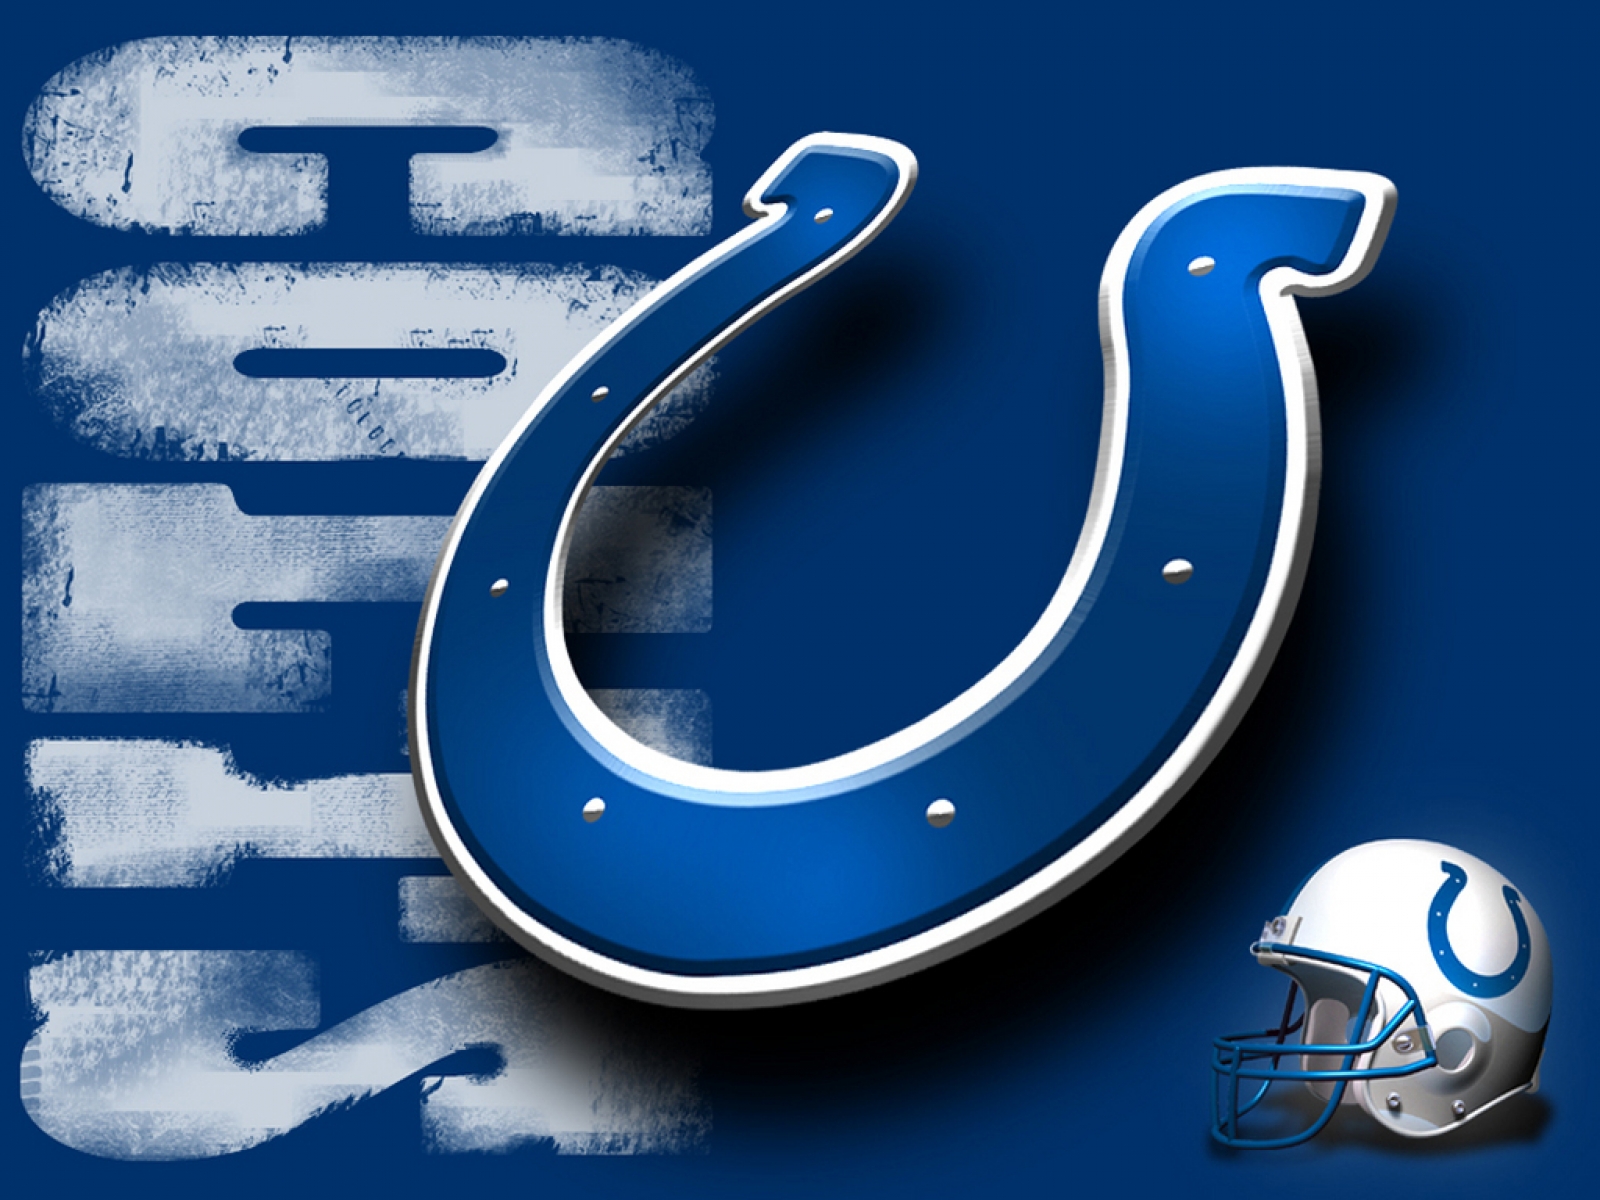 Indianapolis Colts Image Wallpaper Chainimage